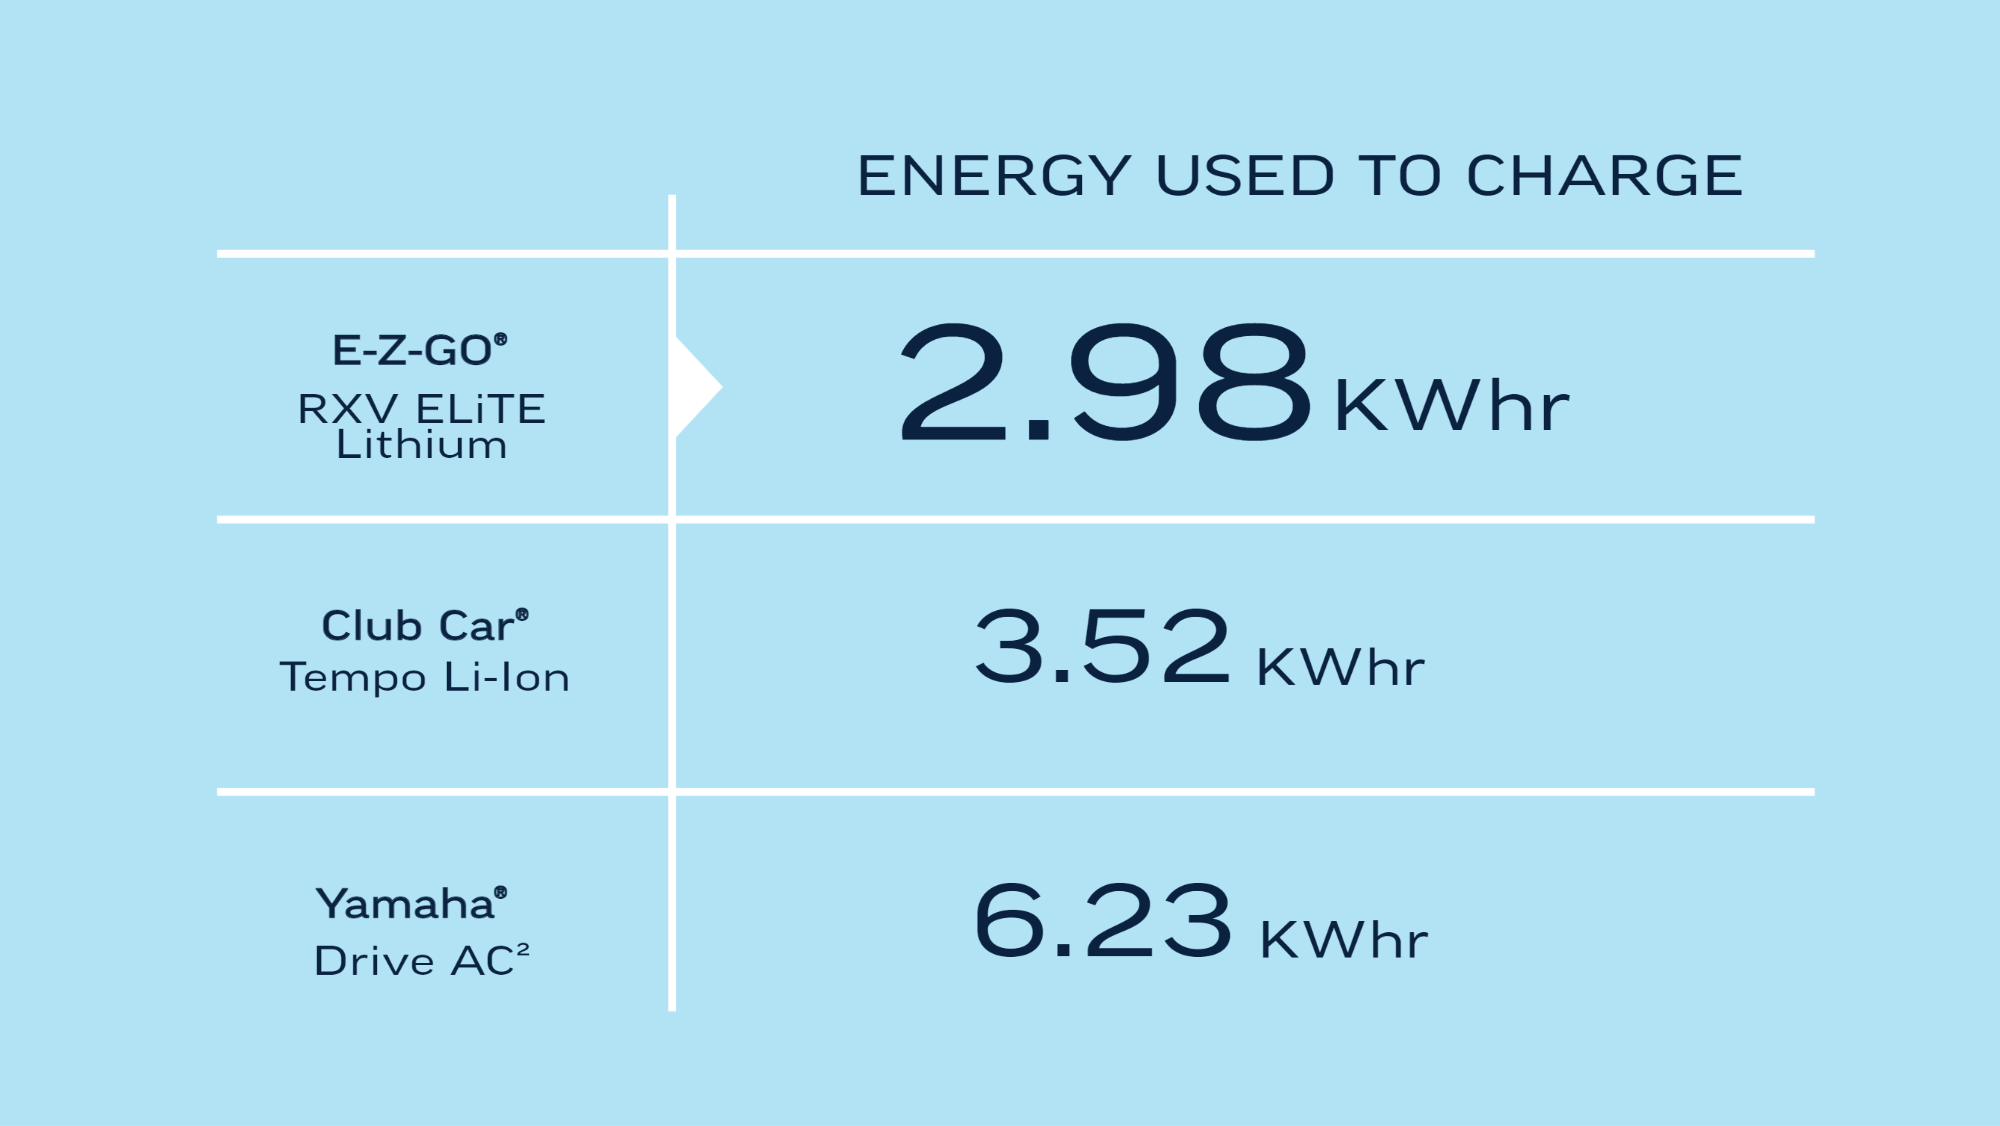 Energy Used to Charge is lower with Lowest Cost of Electric with our ELiTE powertrain on our golfcart